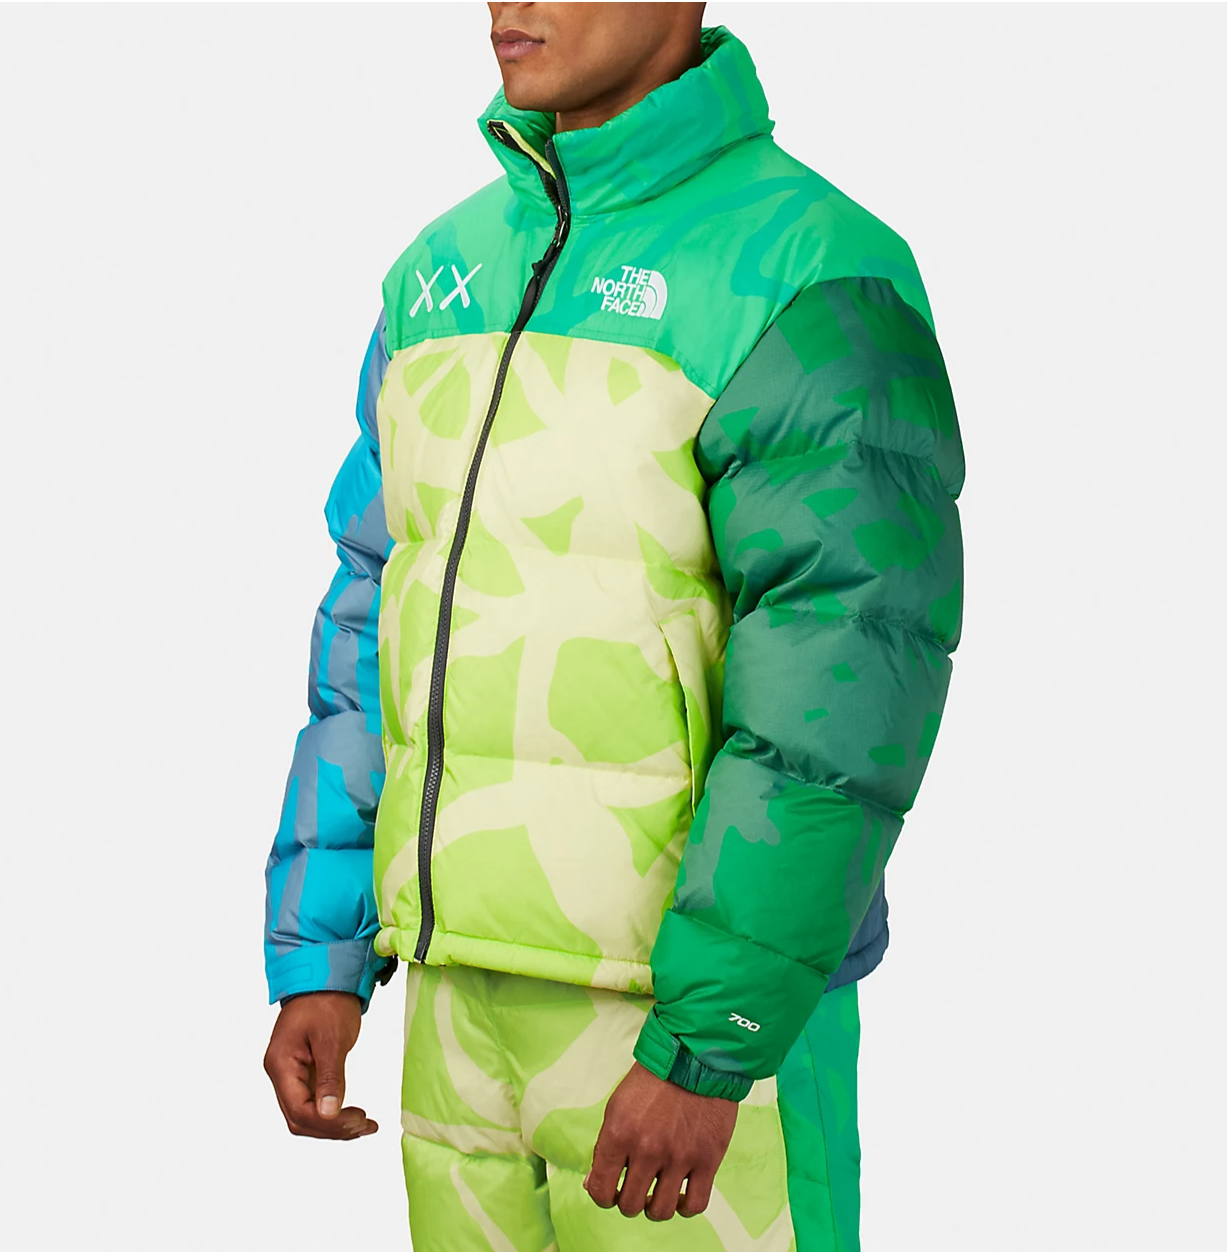 Double Boxed hoodie 474.99 KAWS x The North Face Retro 1996 Nupste Jacket Safety Green Double Boxed